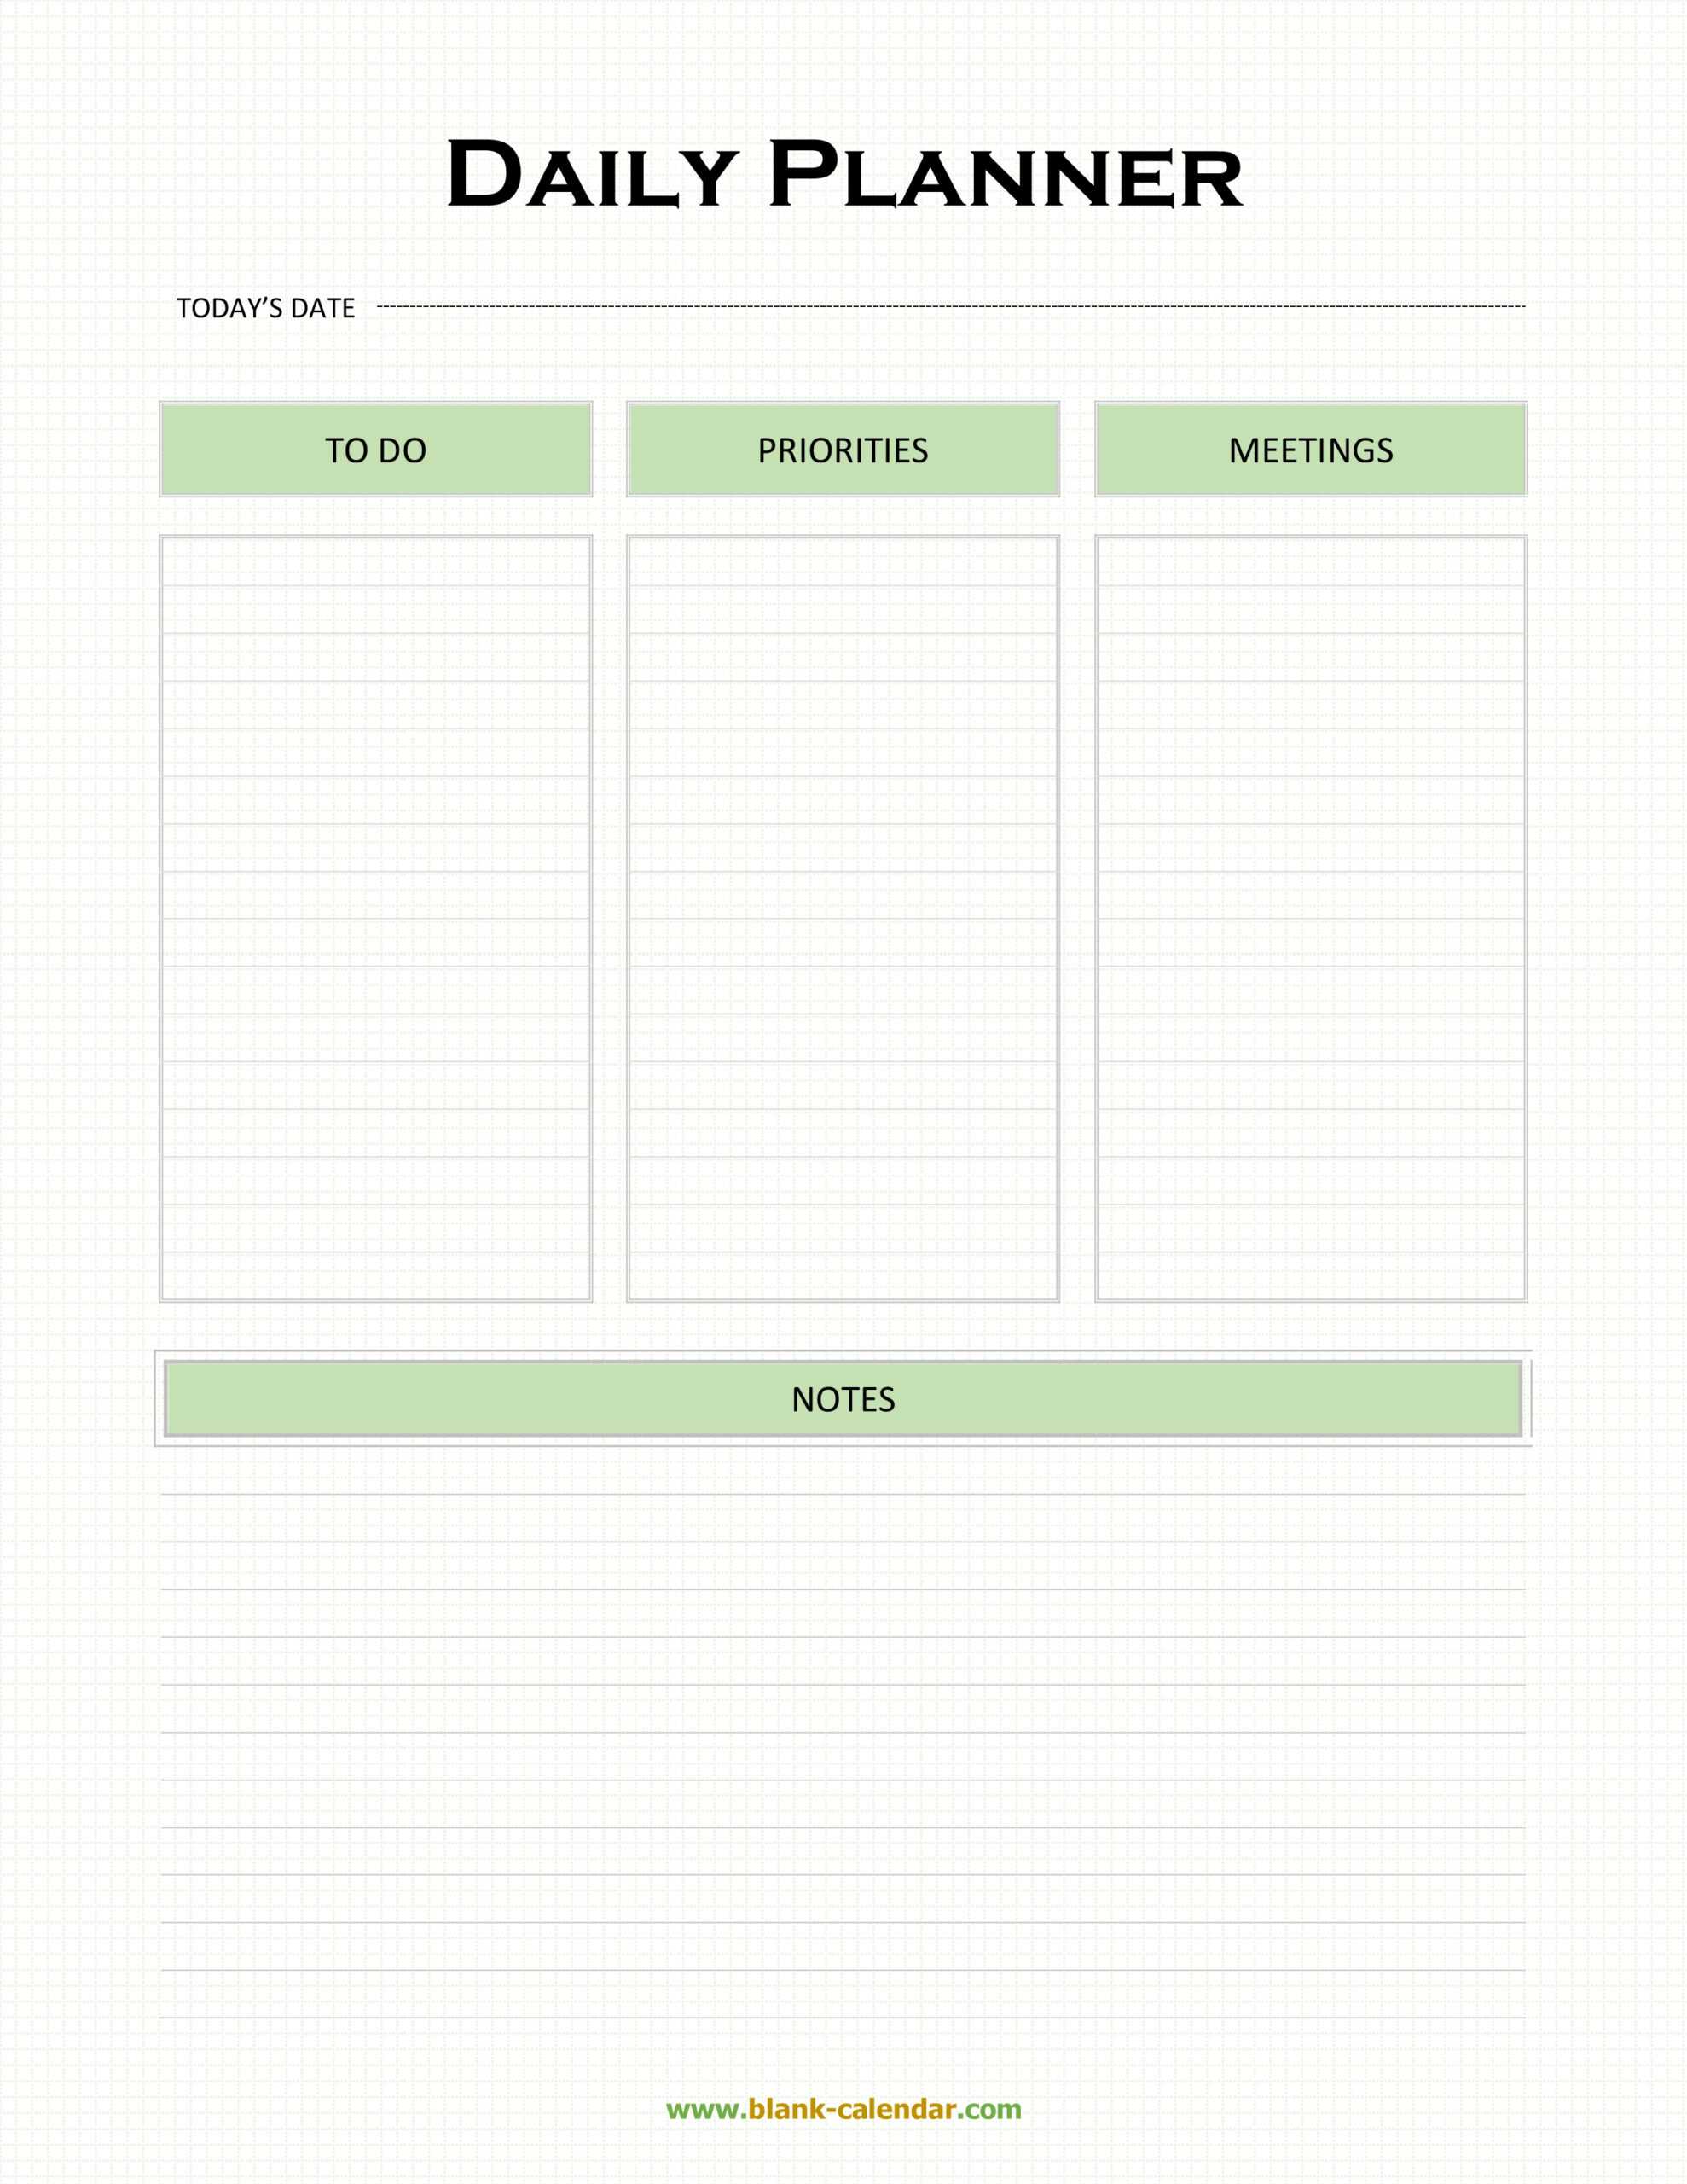 Daily Planner Templates (Word, Excel, Pdf) Intended For Printable Blank Daily Schedule Template